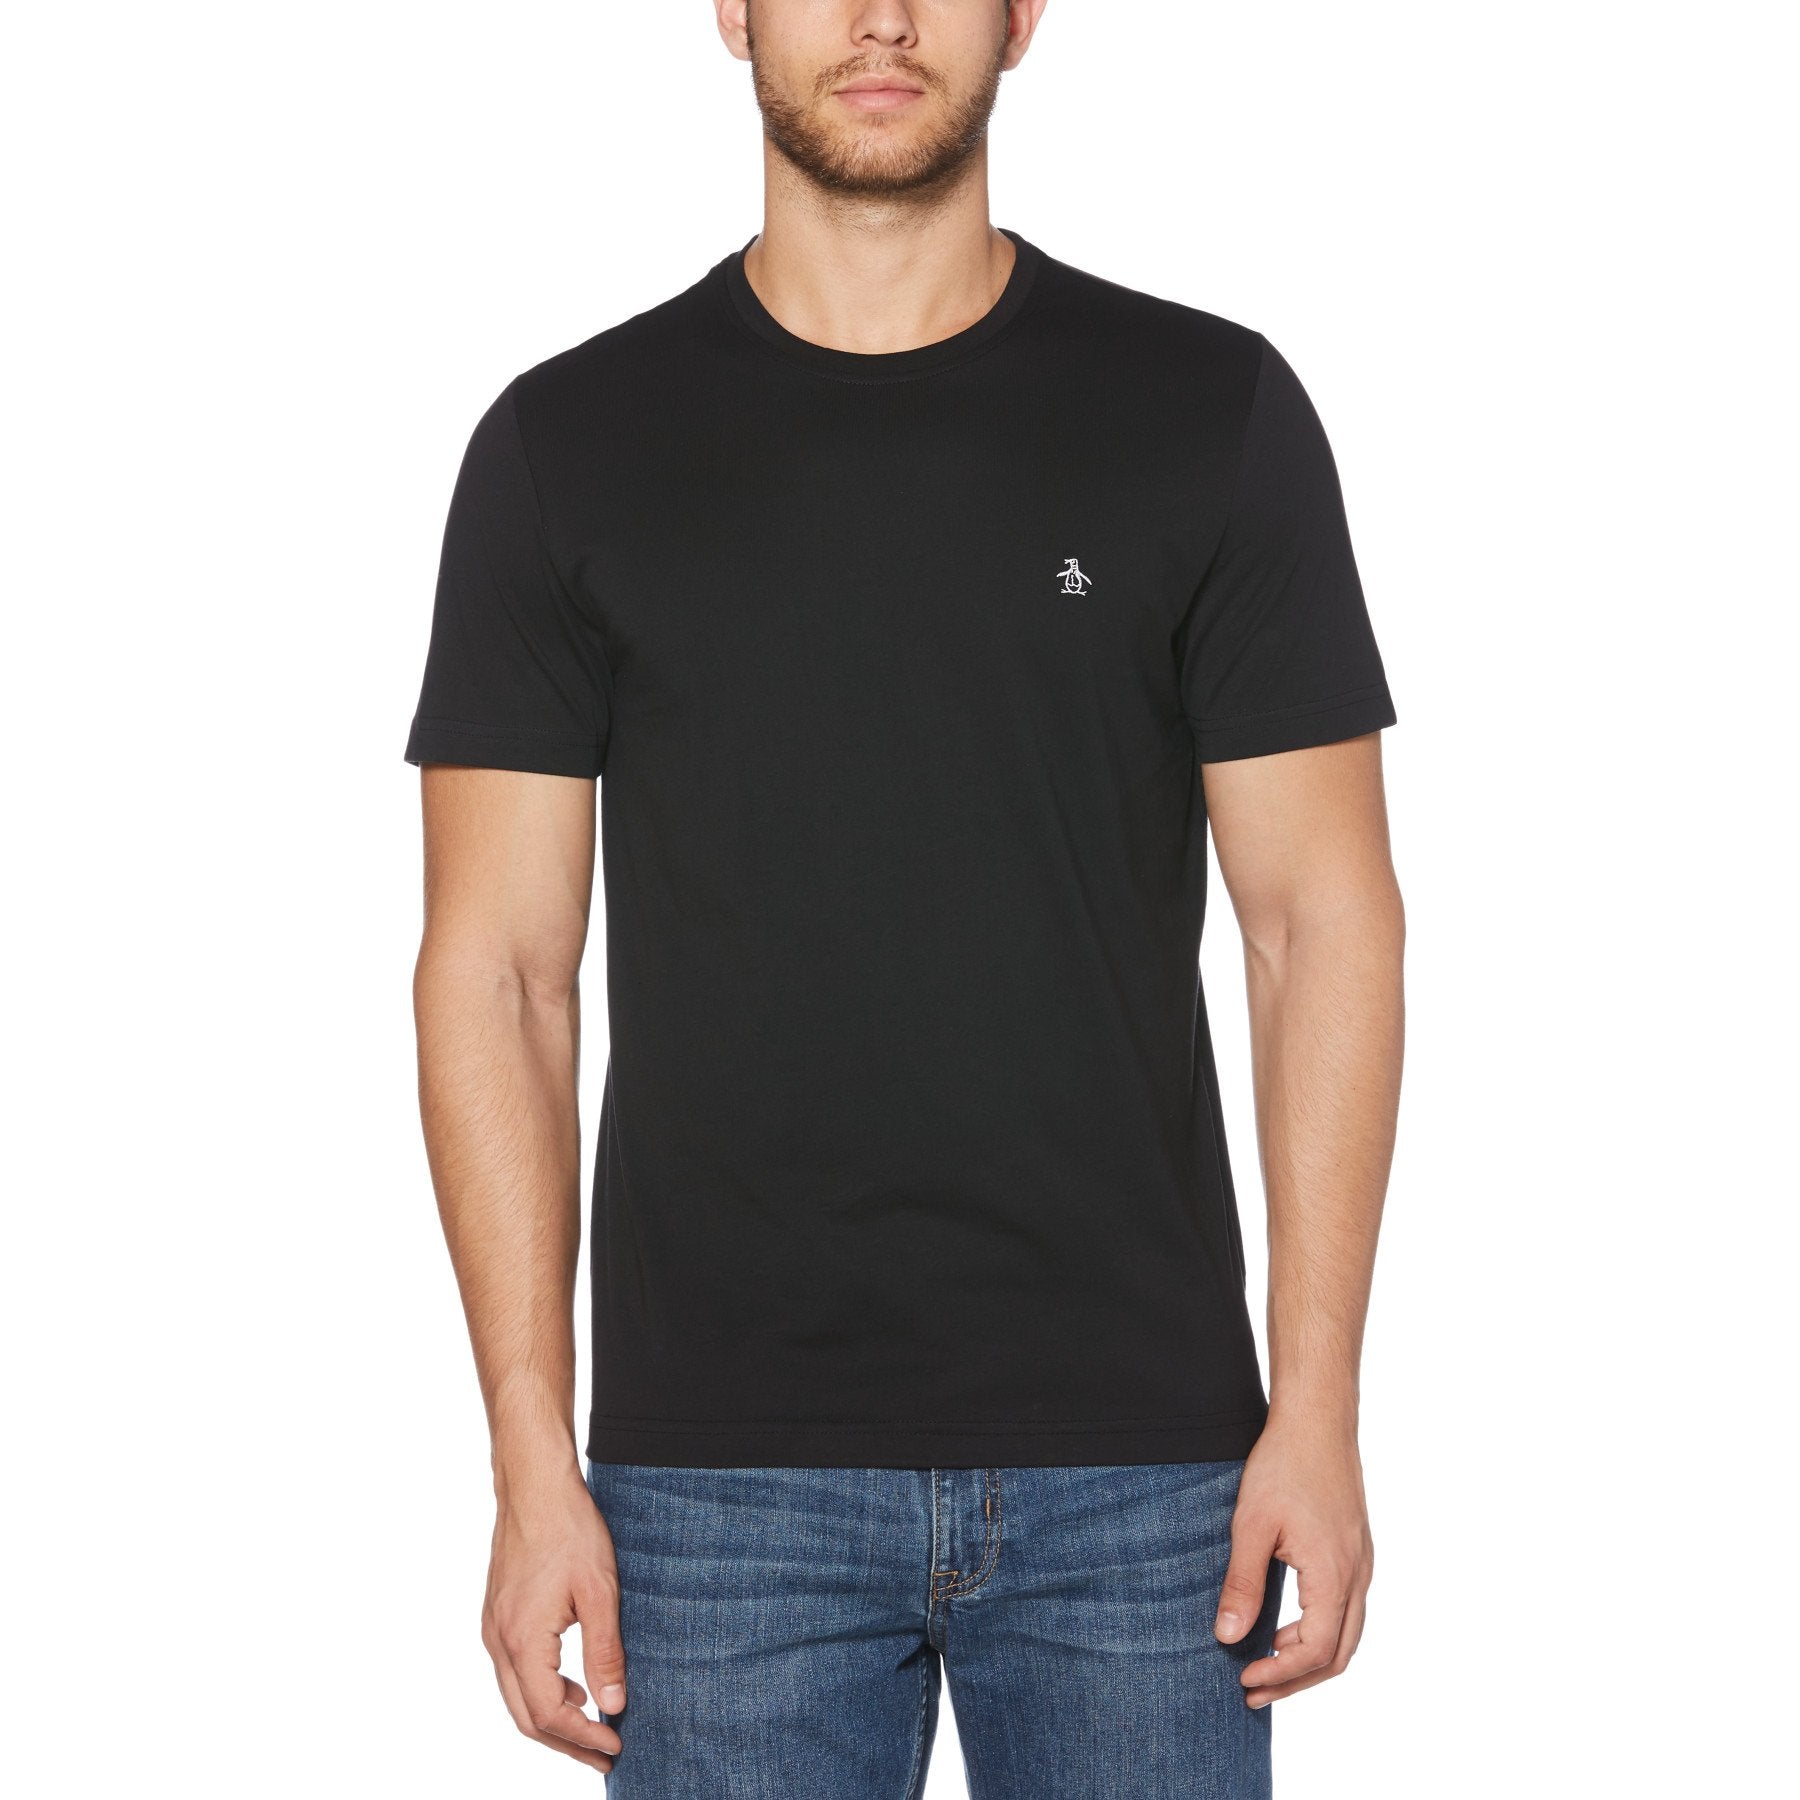 View Pin Point Embroidered Logo Organic Cotton TShirt In True Black information